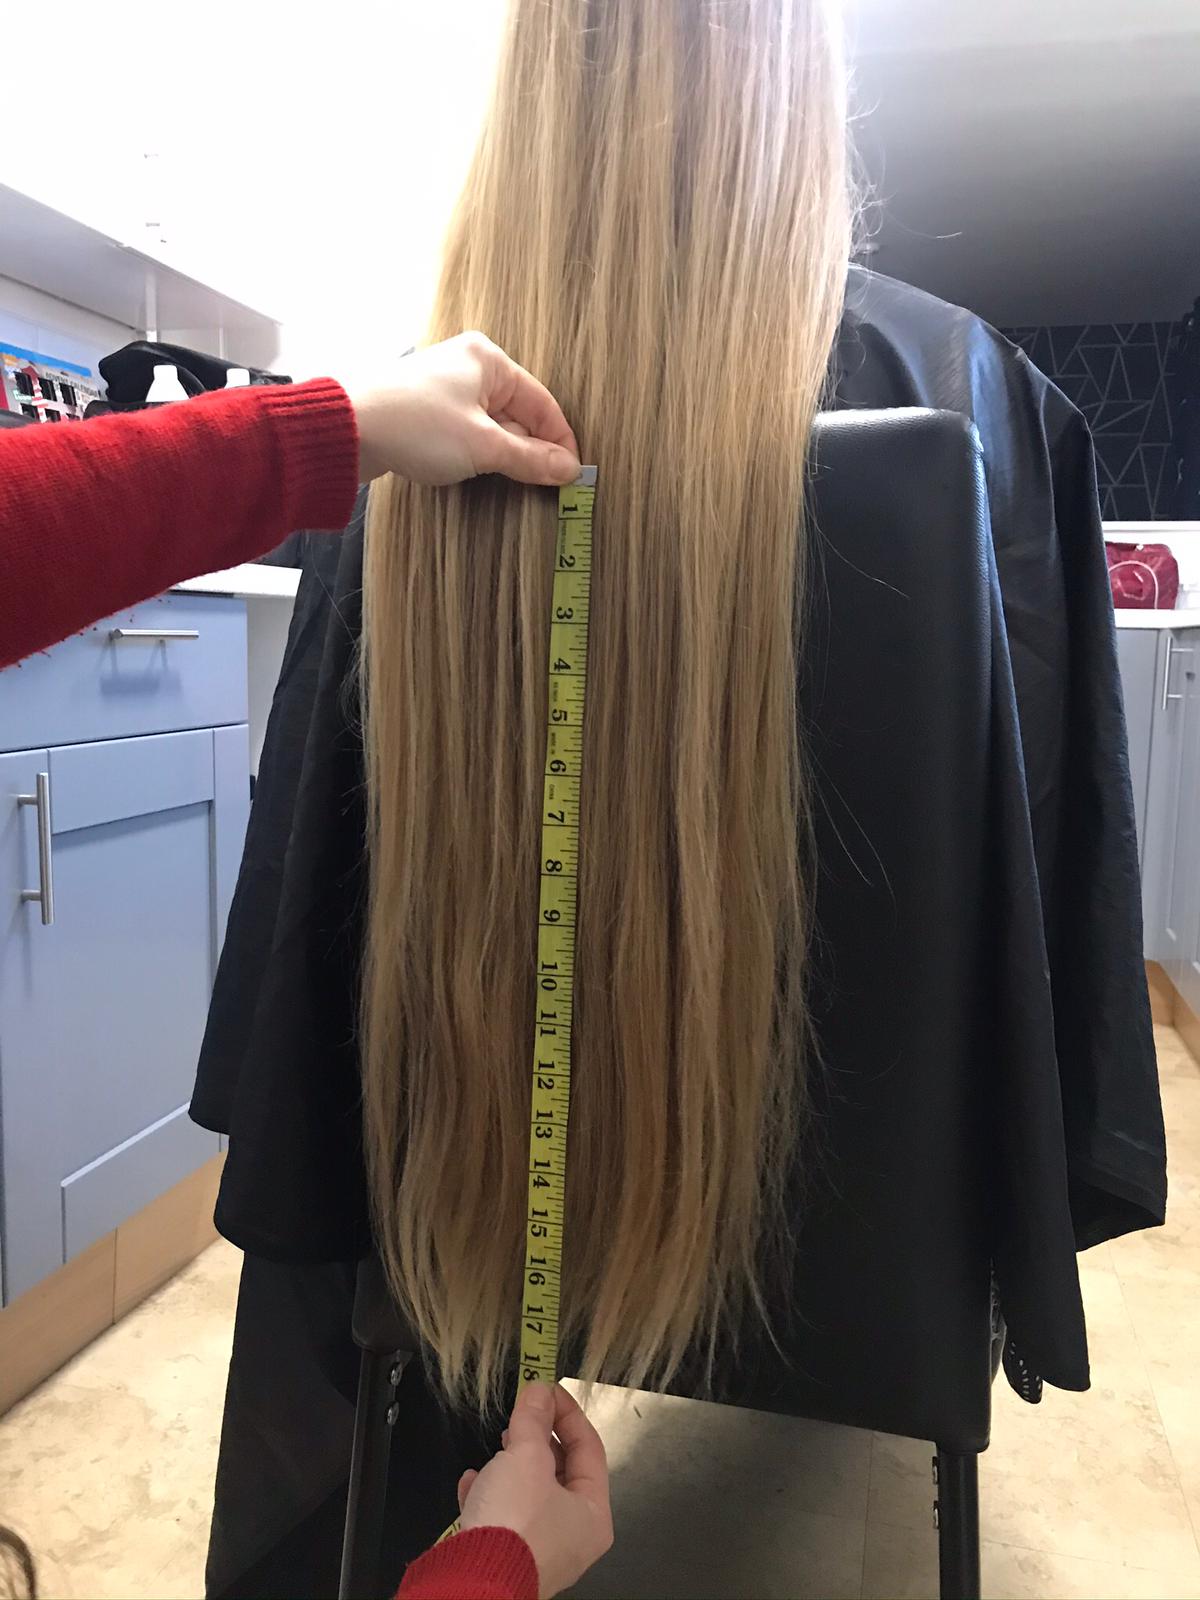 Pharmacist is donating hair to The Little Princess Trust | Interface CS